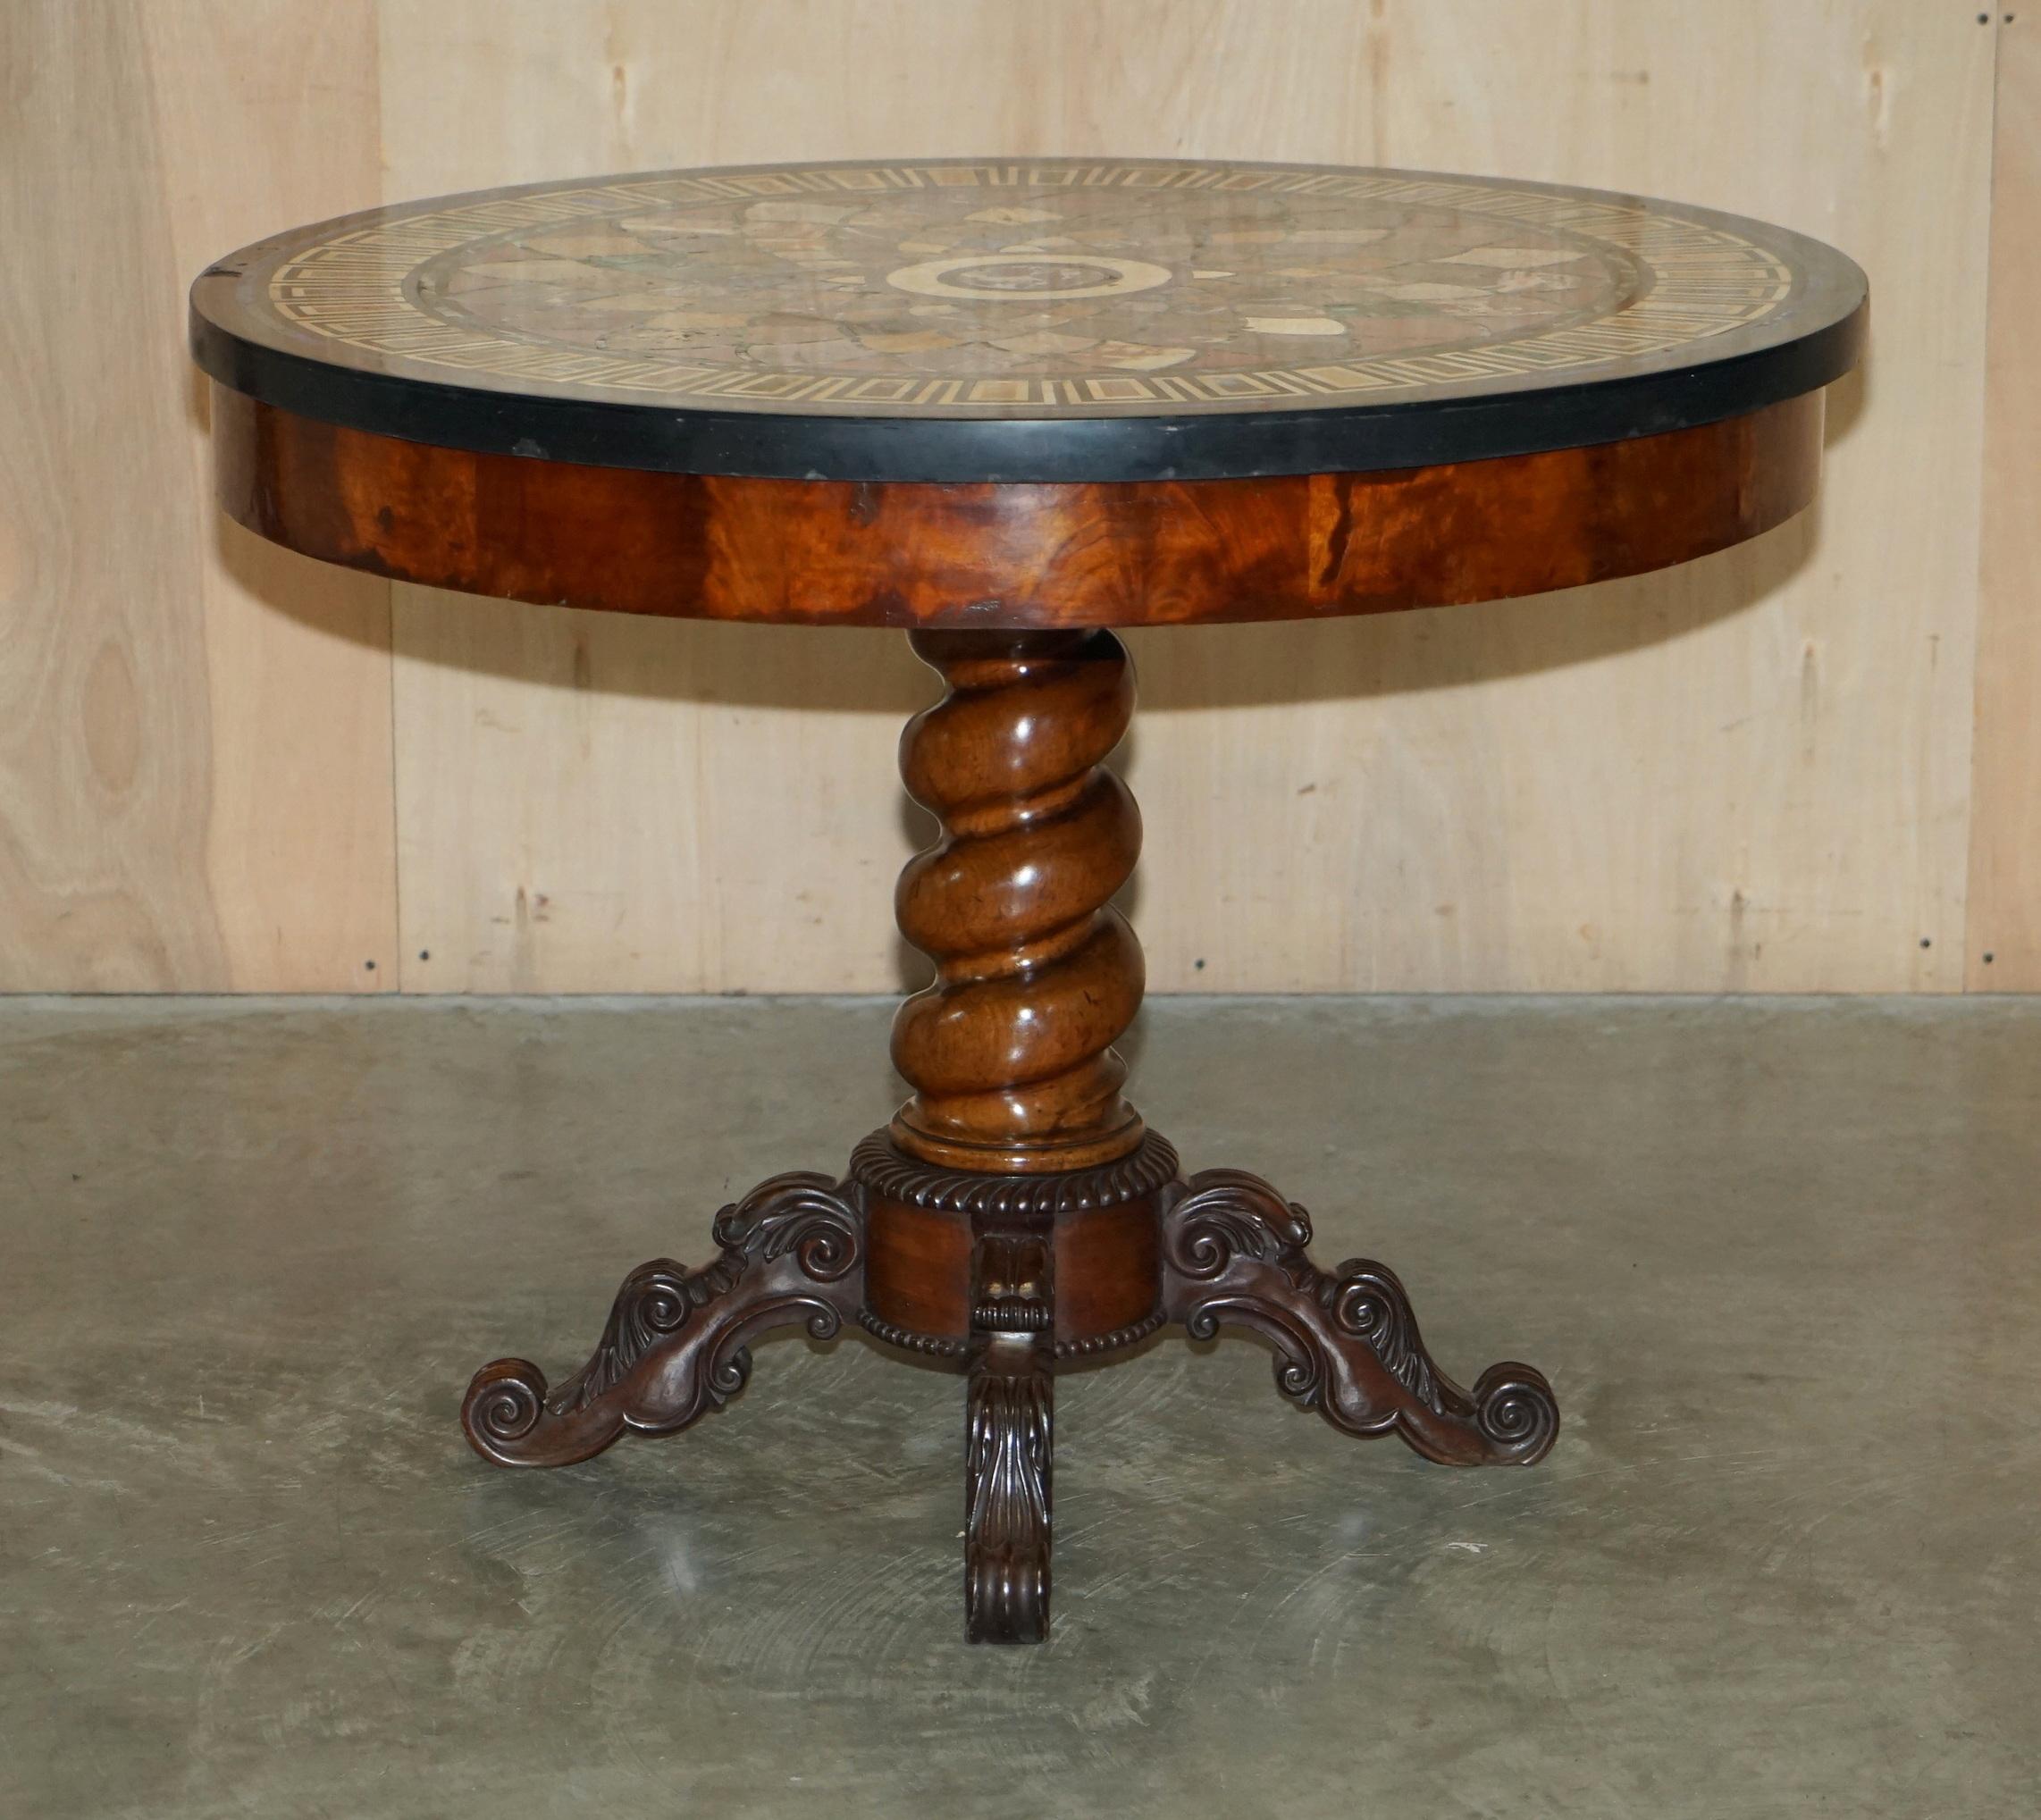 We are delighted to offer for sale this important William Iv Circa 1830 Flamed Mahogany Spiral Column base centre table with stunning Pietra Dura Speciamine Marble top 

A truly sublime centre table, the base has been restored by my French